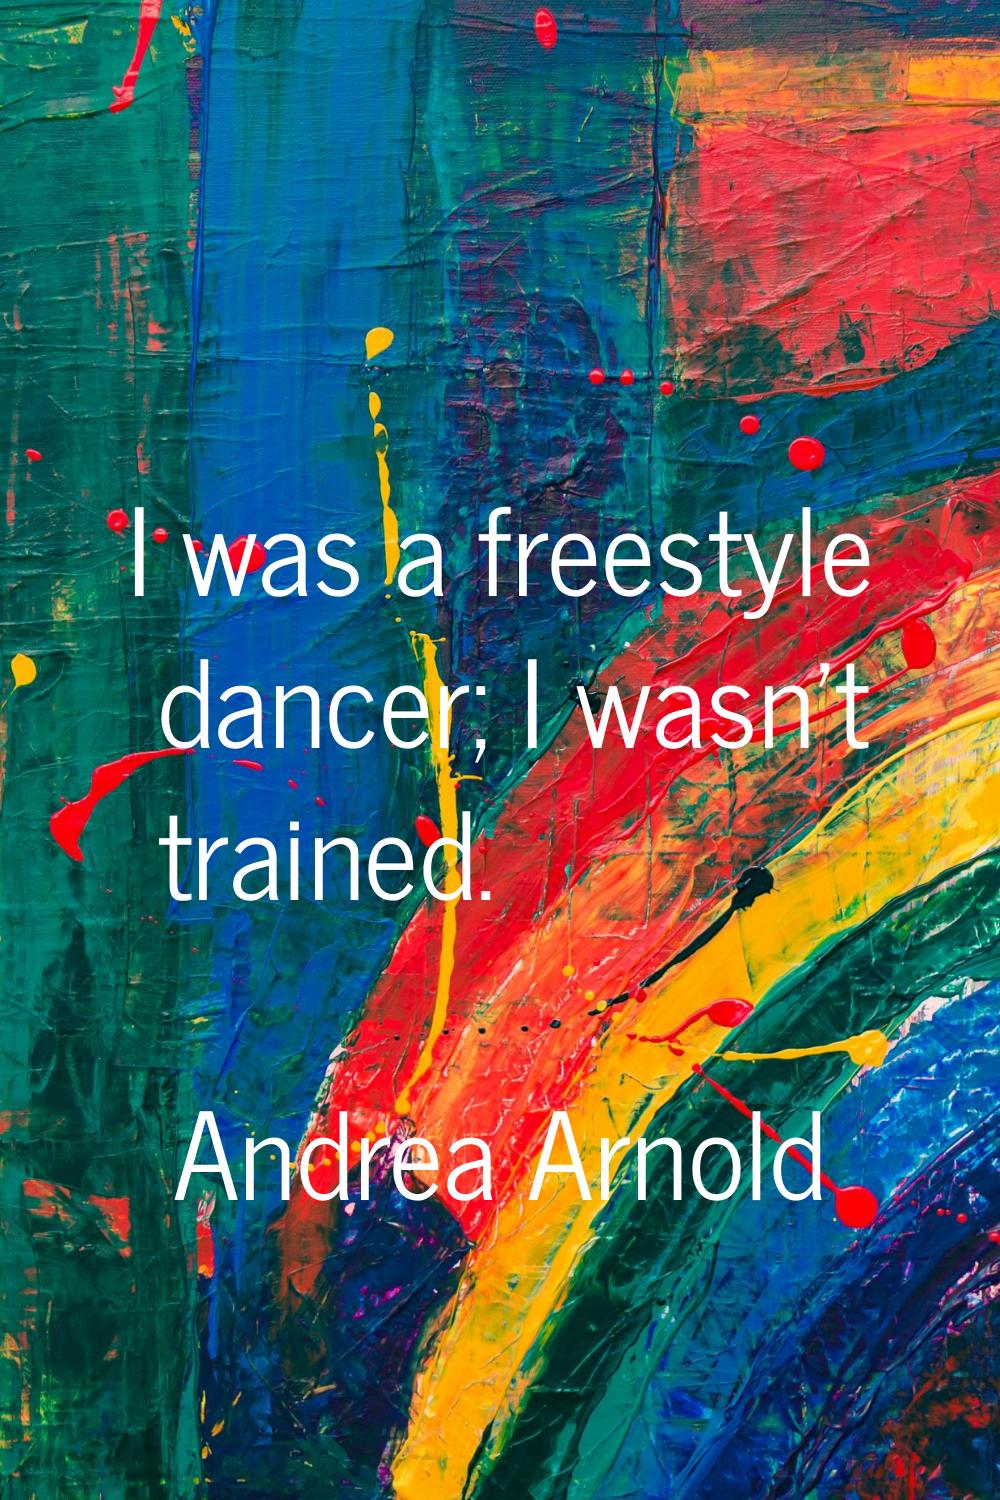 I was a freestyle dancer; I wasn't trained.